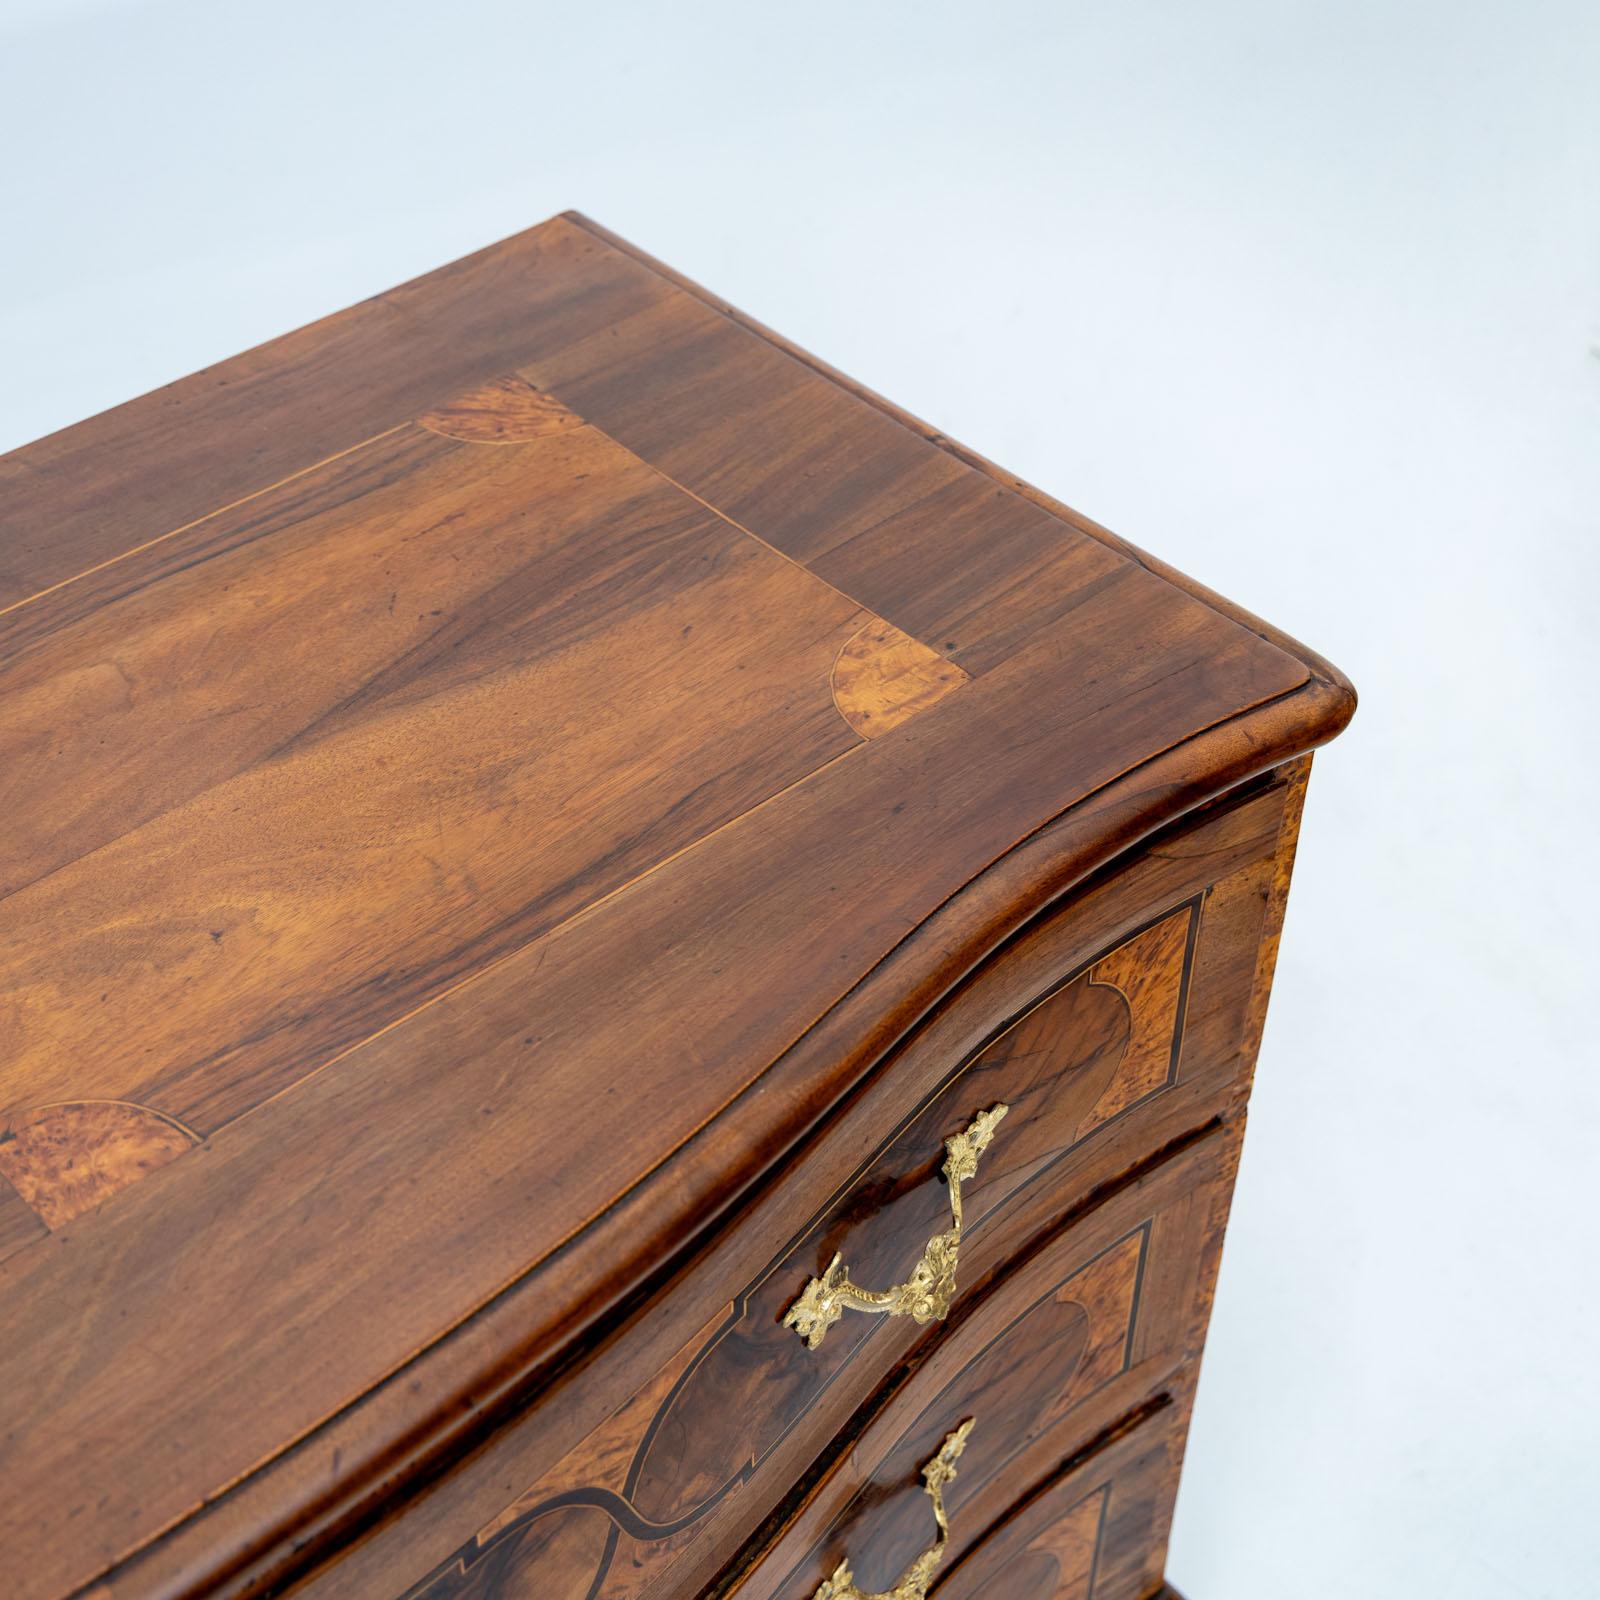 Baroque Chest of Drawers in Walnut, Inlaywork and Bronze fittings, Mid-18th C. For Sale 1